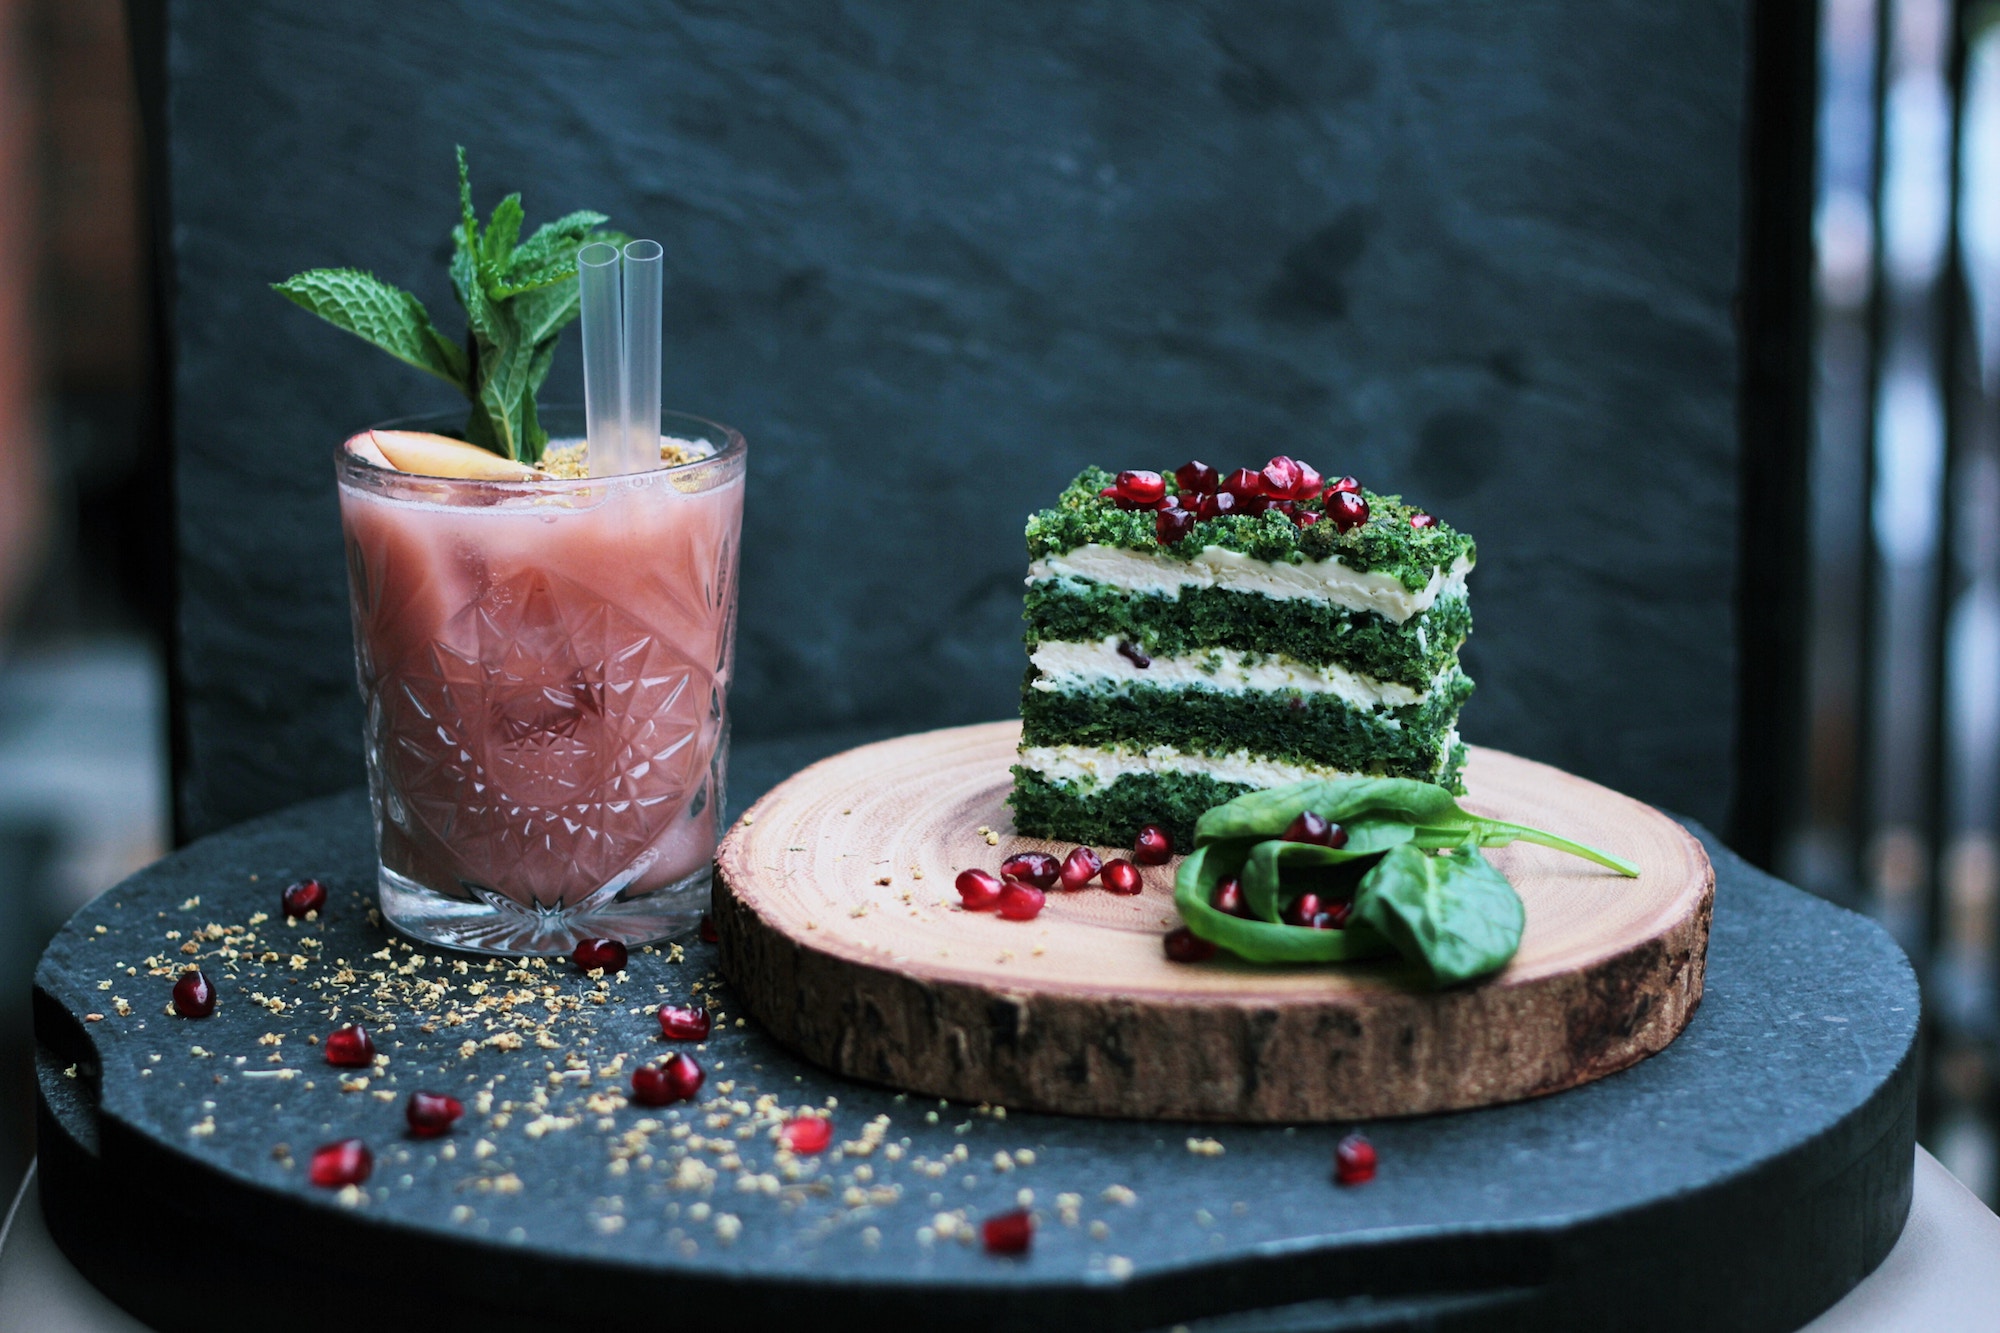 10 Secrets to Honing Your Food Photography Skills